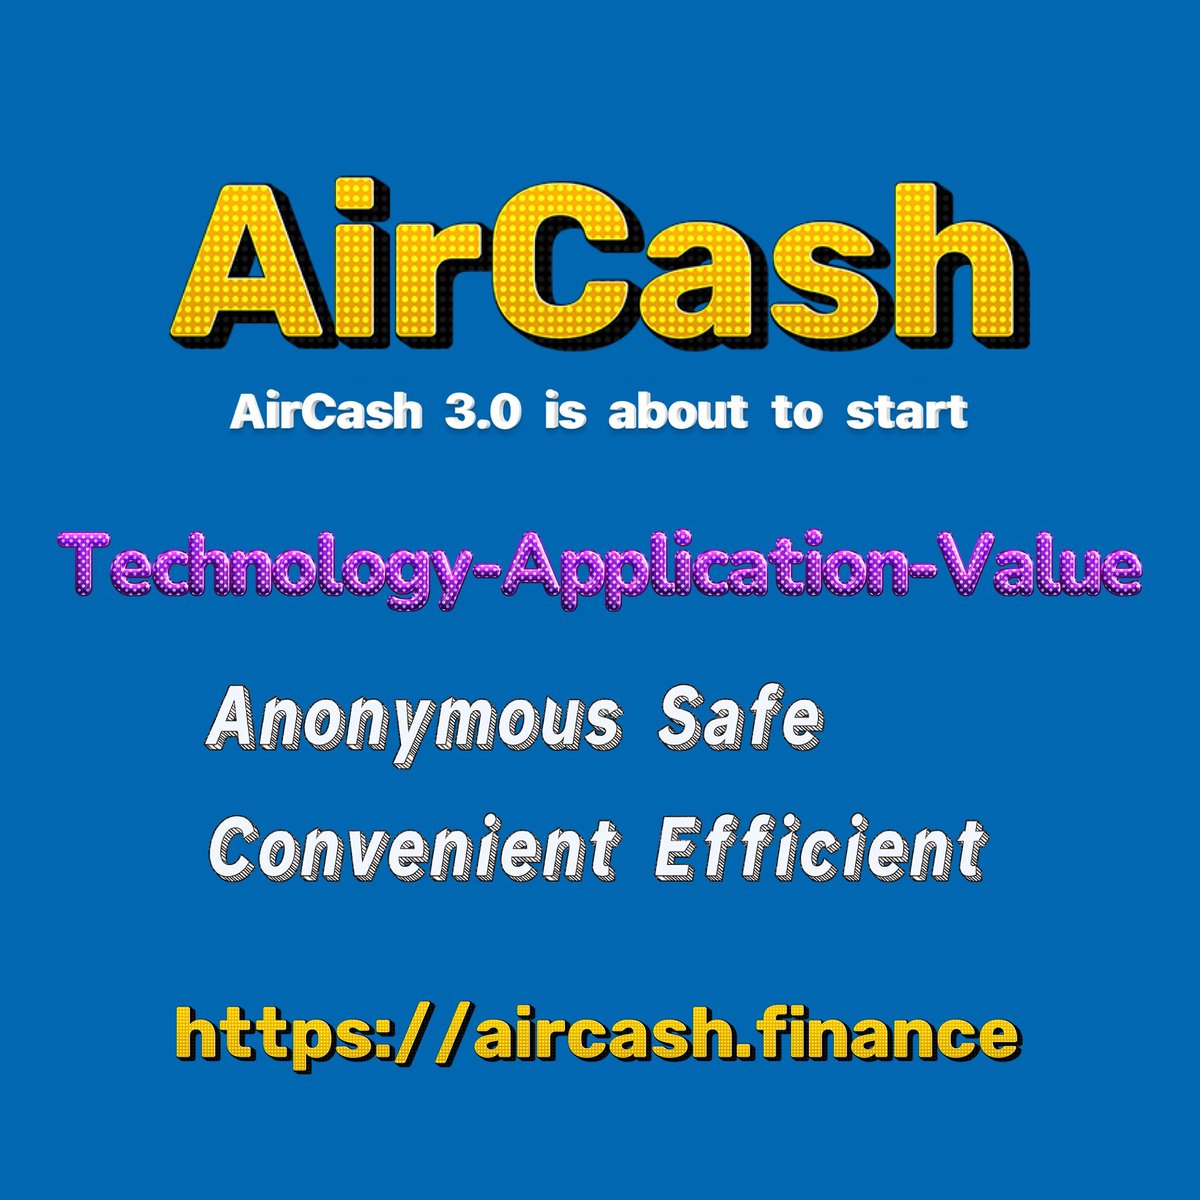 As a user of #Aircash, I can attest to the incredible speed and convenience of these platforms. Keep up the great work
@Aircoinreal
#AirCoinDAOLabs #AirCoin #AirCash #AirSwap #AirArmy #AirChain #AirDAO #AIRNFT #ACGVentures #Air #1000xGems #100xGems #digitalasset #Crypto